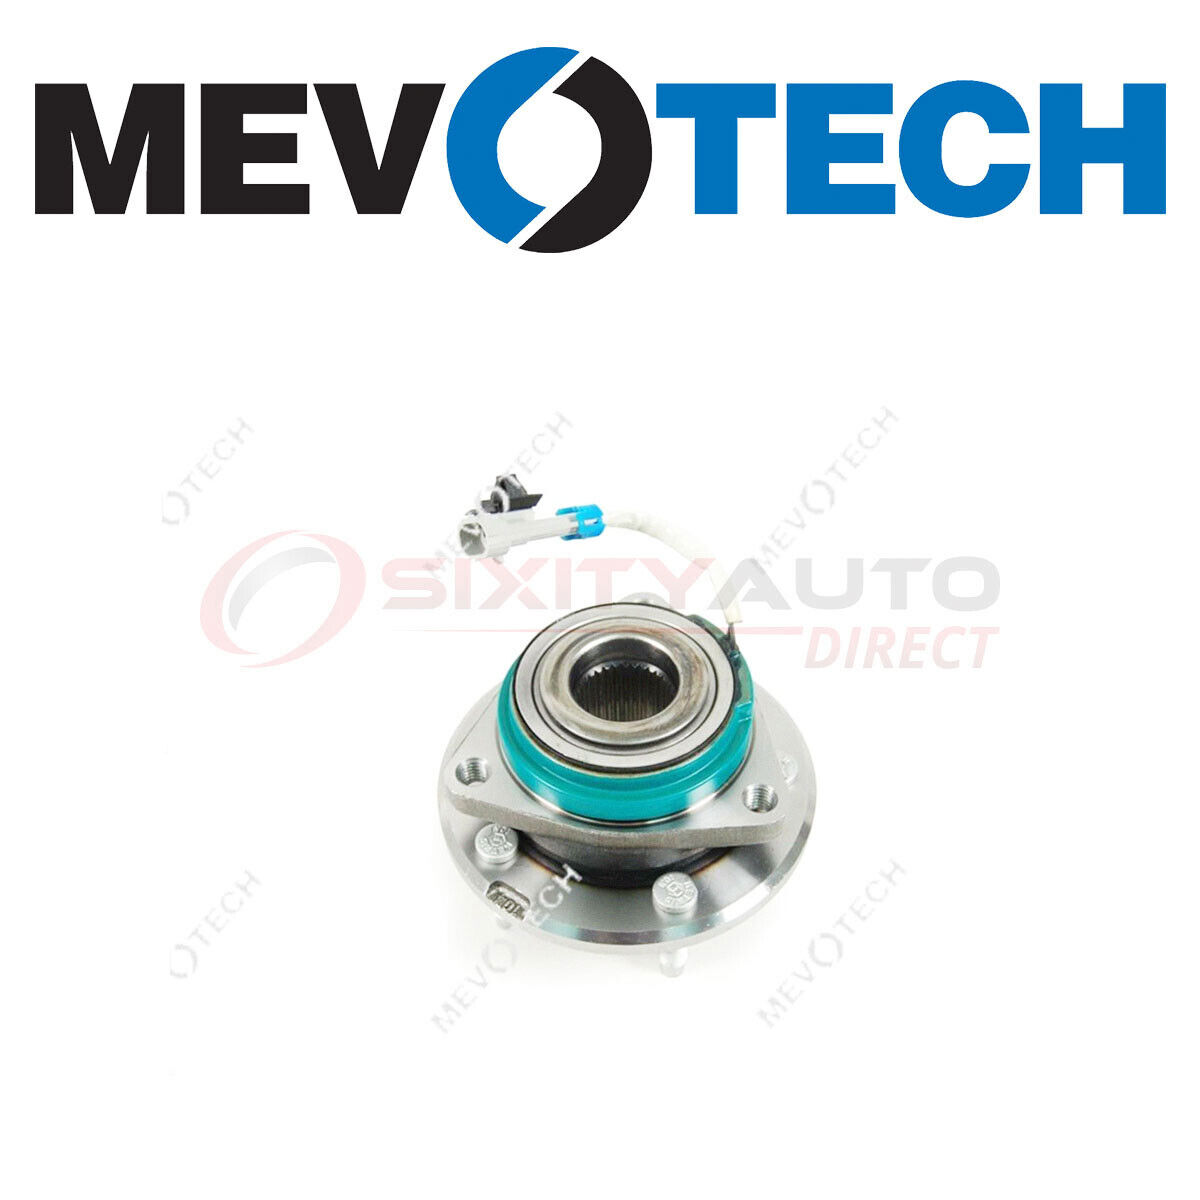 Mevotech Wheel Bearing & Hub Assembly for 2001-2002 Oldsmobile Intrigue 3.5L ex